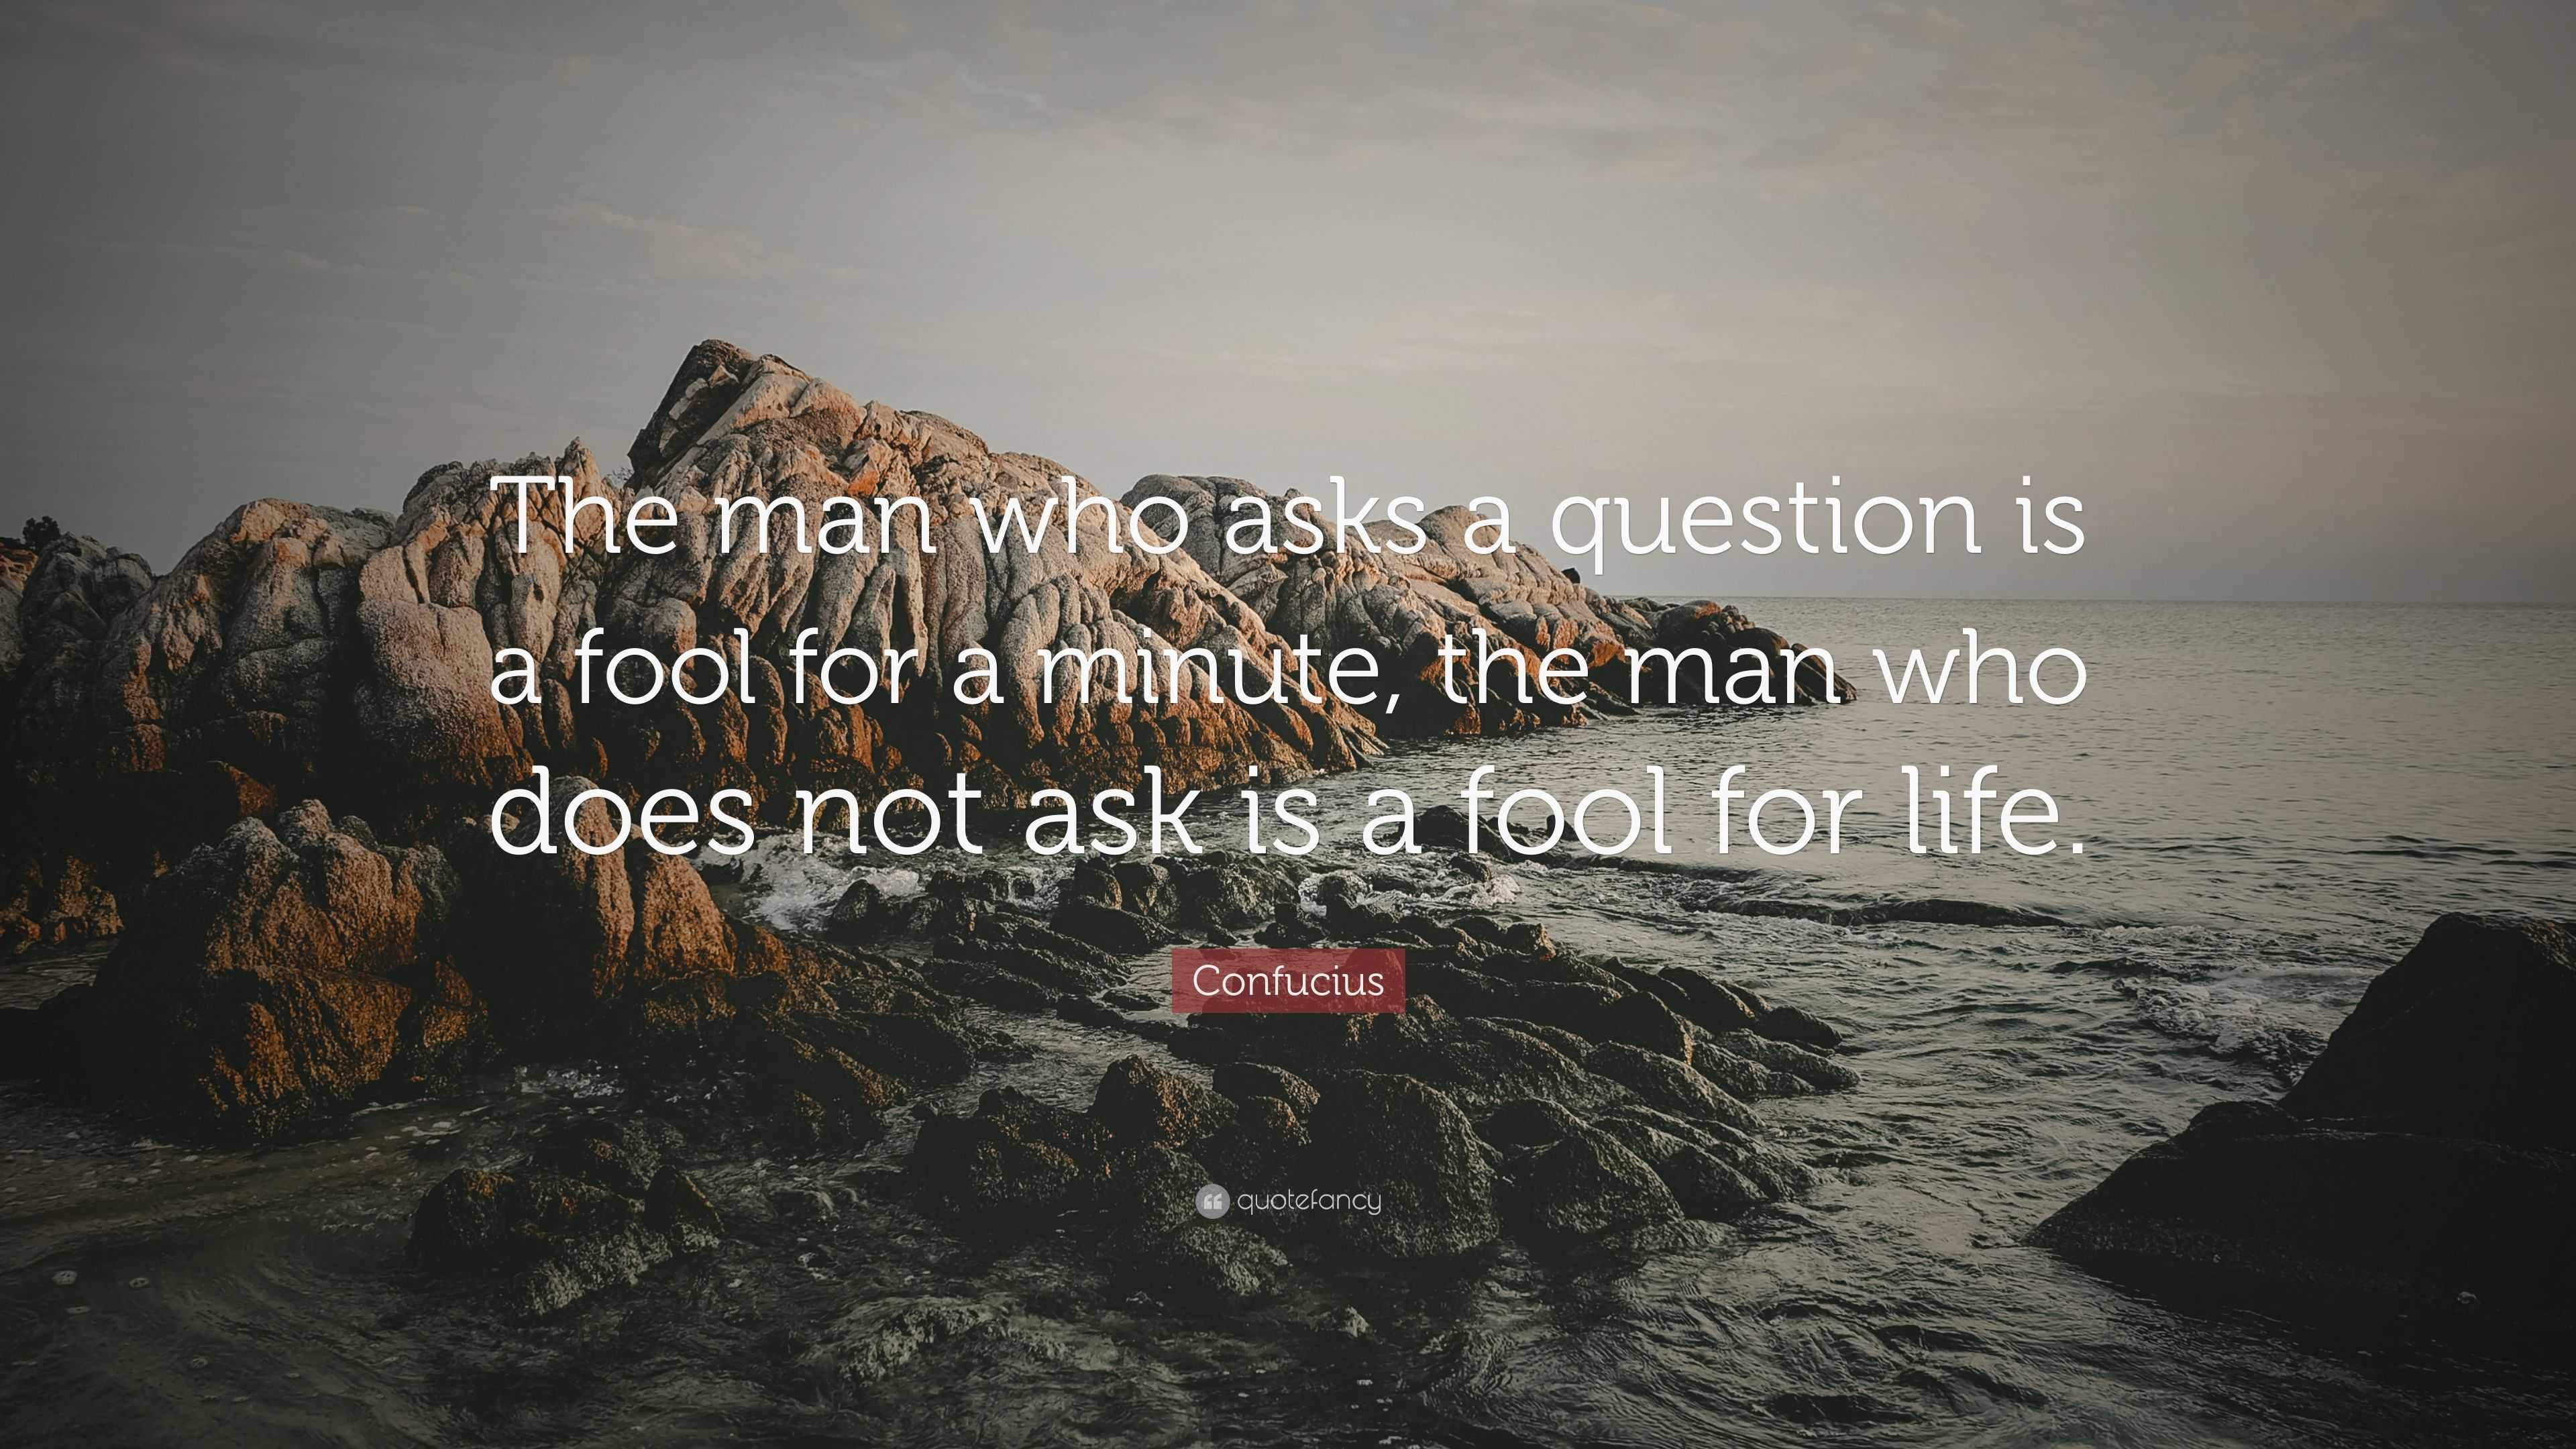 Confucius Quote: “The man who asks a question is a fool for a minute ...